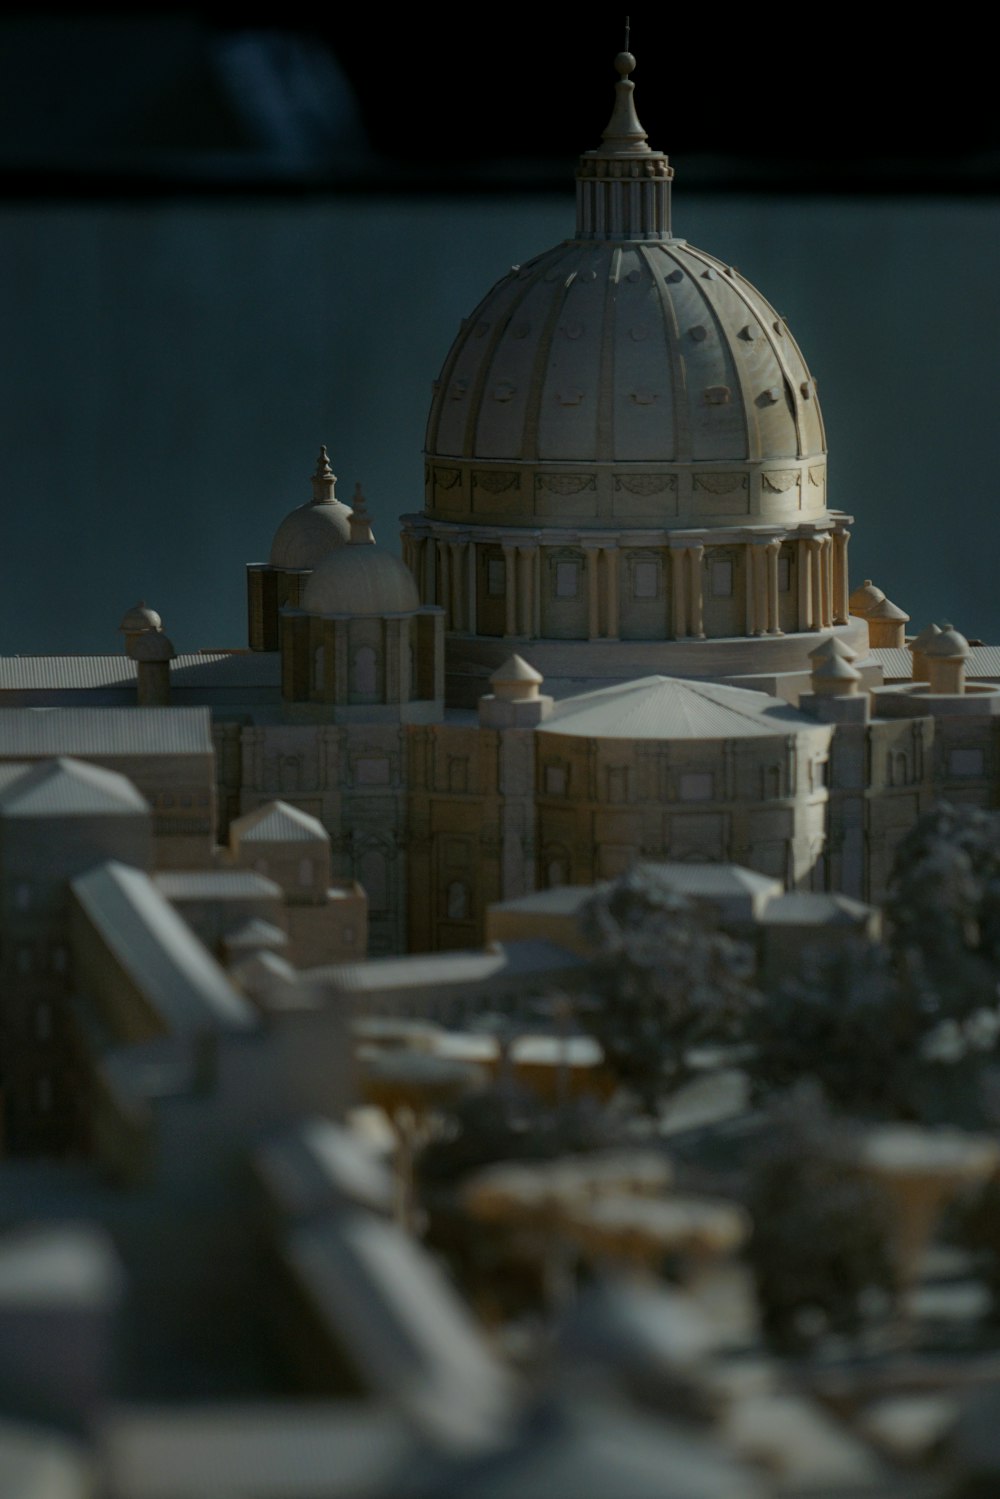 a model of a large building with a dome